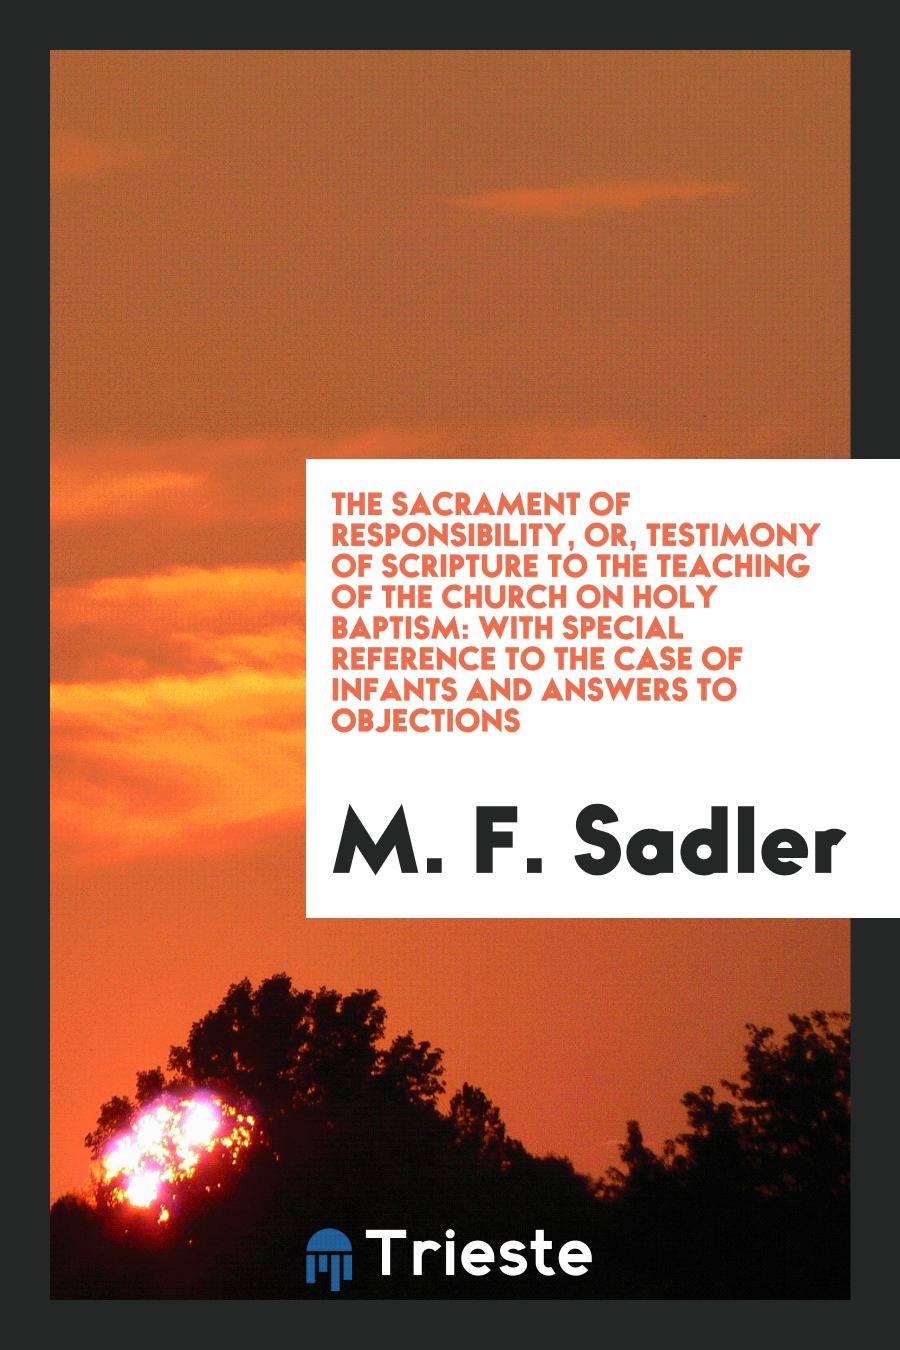 The Sacrament of Responsibility, or, Testimony of Scripture to the Teaching of the Church on Holy Baptism: With Special Reference to the Case of Infants and Answers to Objections